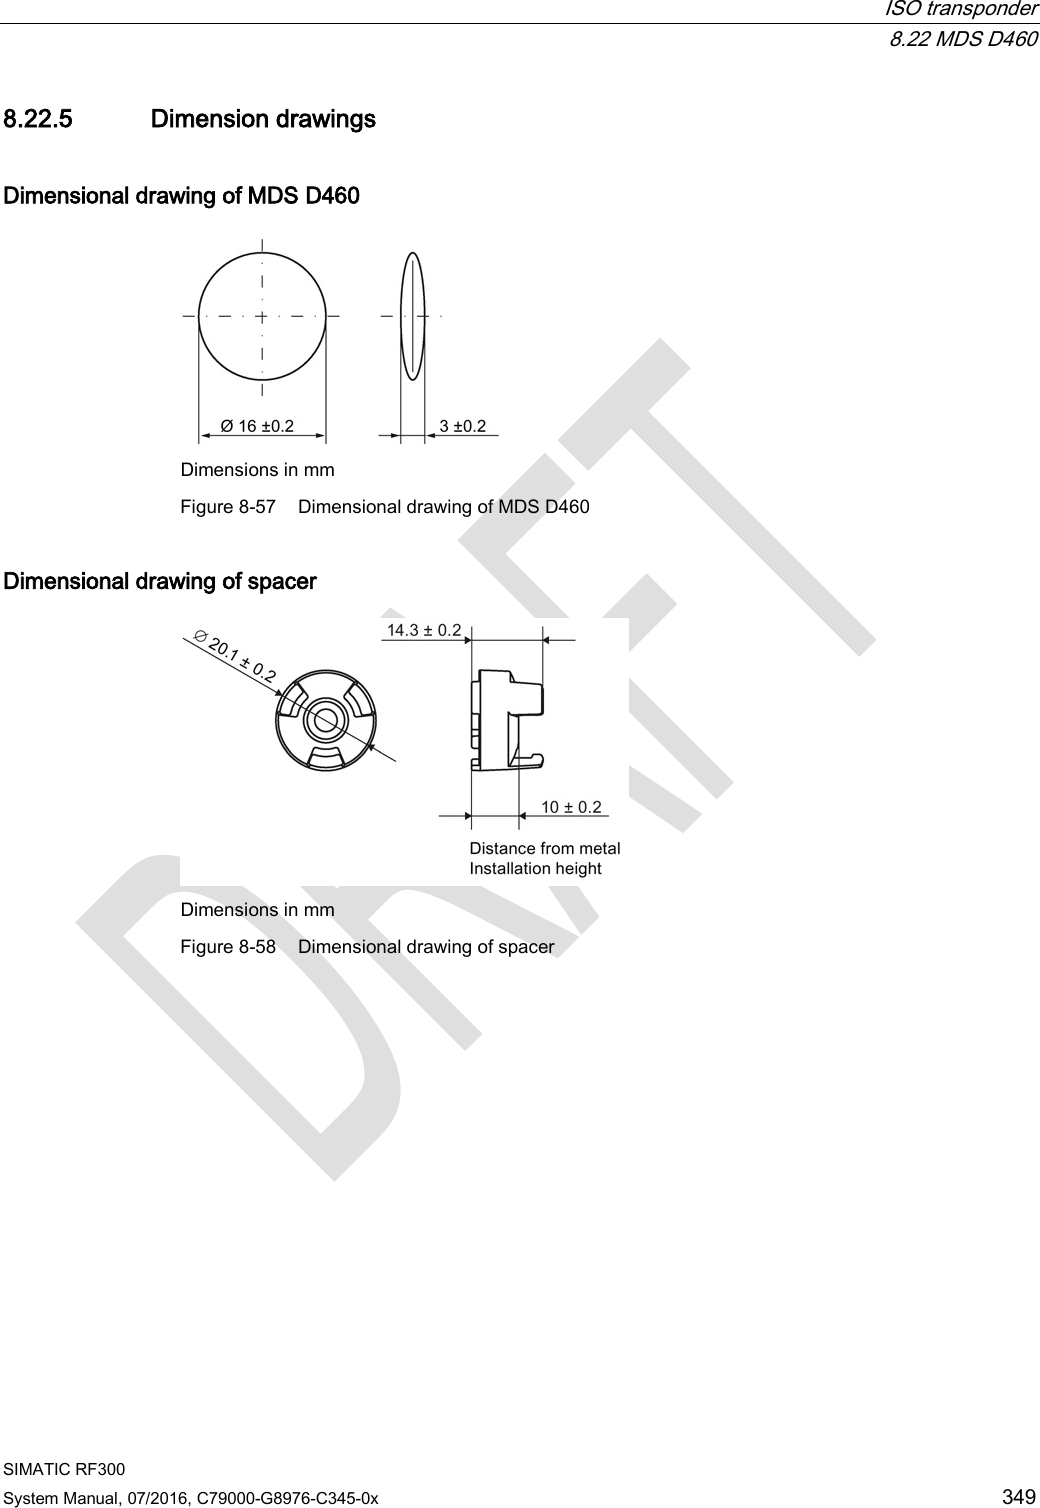  ISO transponder  8.22 MDS D460 SIMATIC RF300 System Manual, 07/2016, C79000-G8976-C345-0x 349 8.22.5 Dimension drawings Dimensional drawing of MDS D460  Dimensions in mm Figure 8-57 Dimensional drawing of MDS D460 Dimensional drawing of spacer  Dimensions in mm Figure 8-58 Dimensional drawing of spacer  